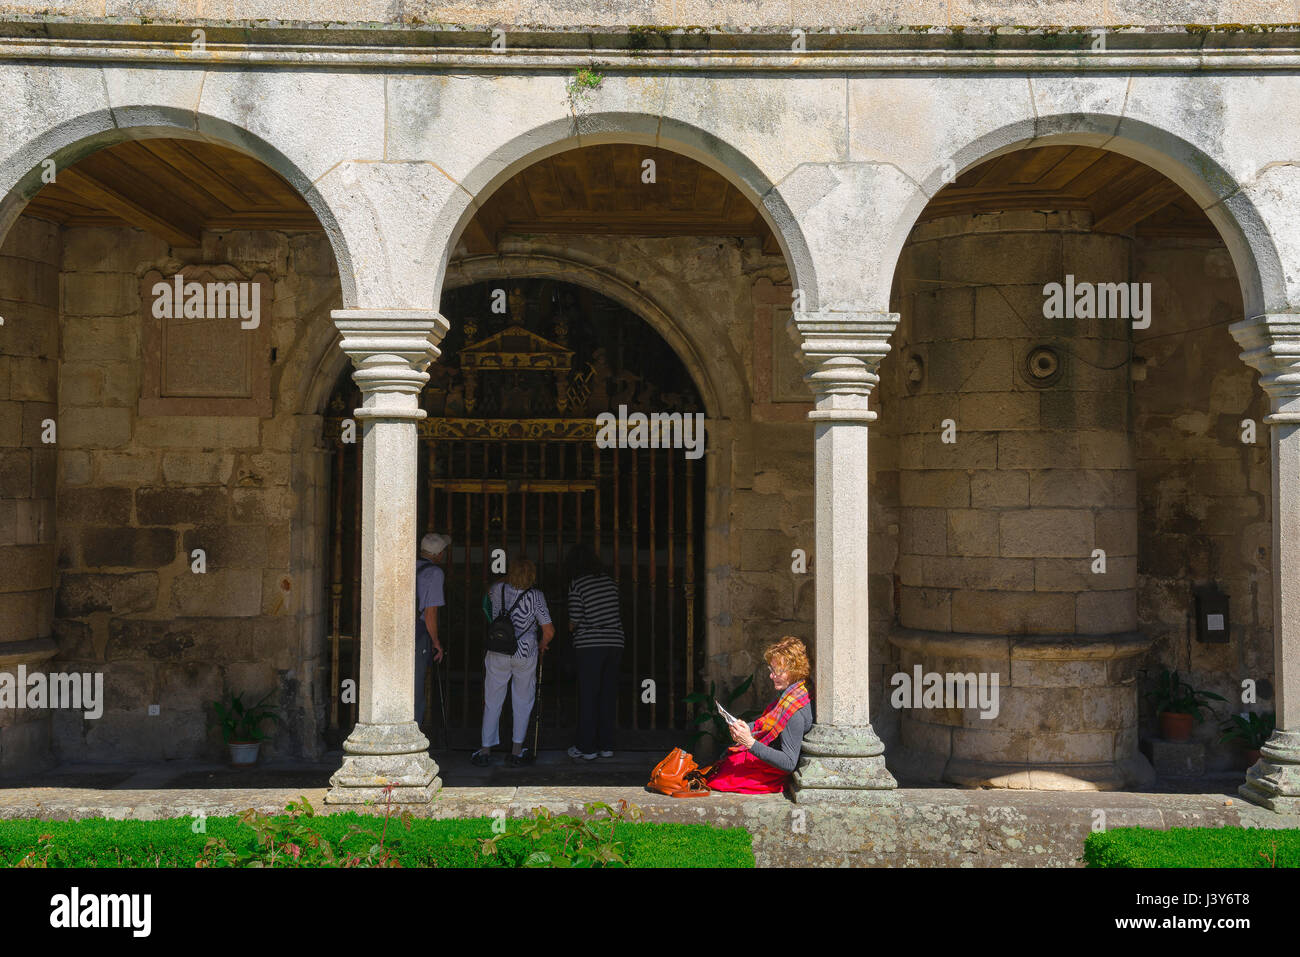 Woman reading book, a middle aged woman reads a book while sitting in a cathedral cloister in Portugal, Europe. Stock Photo